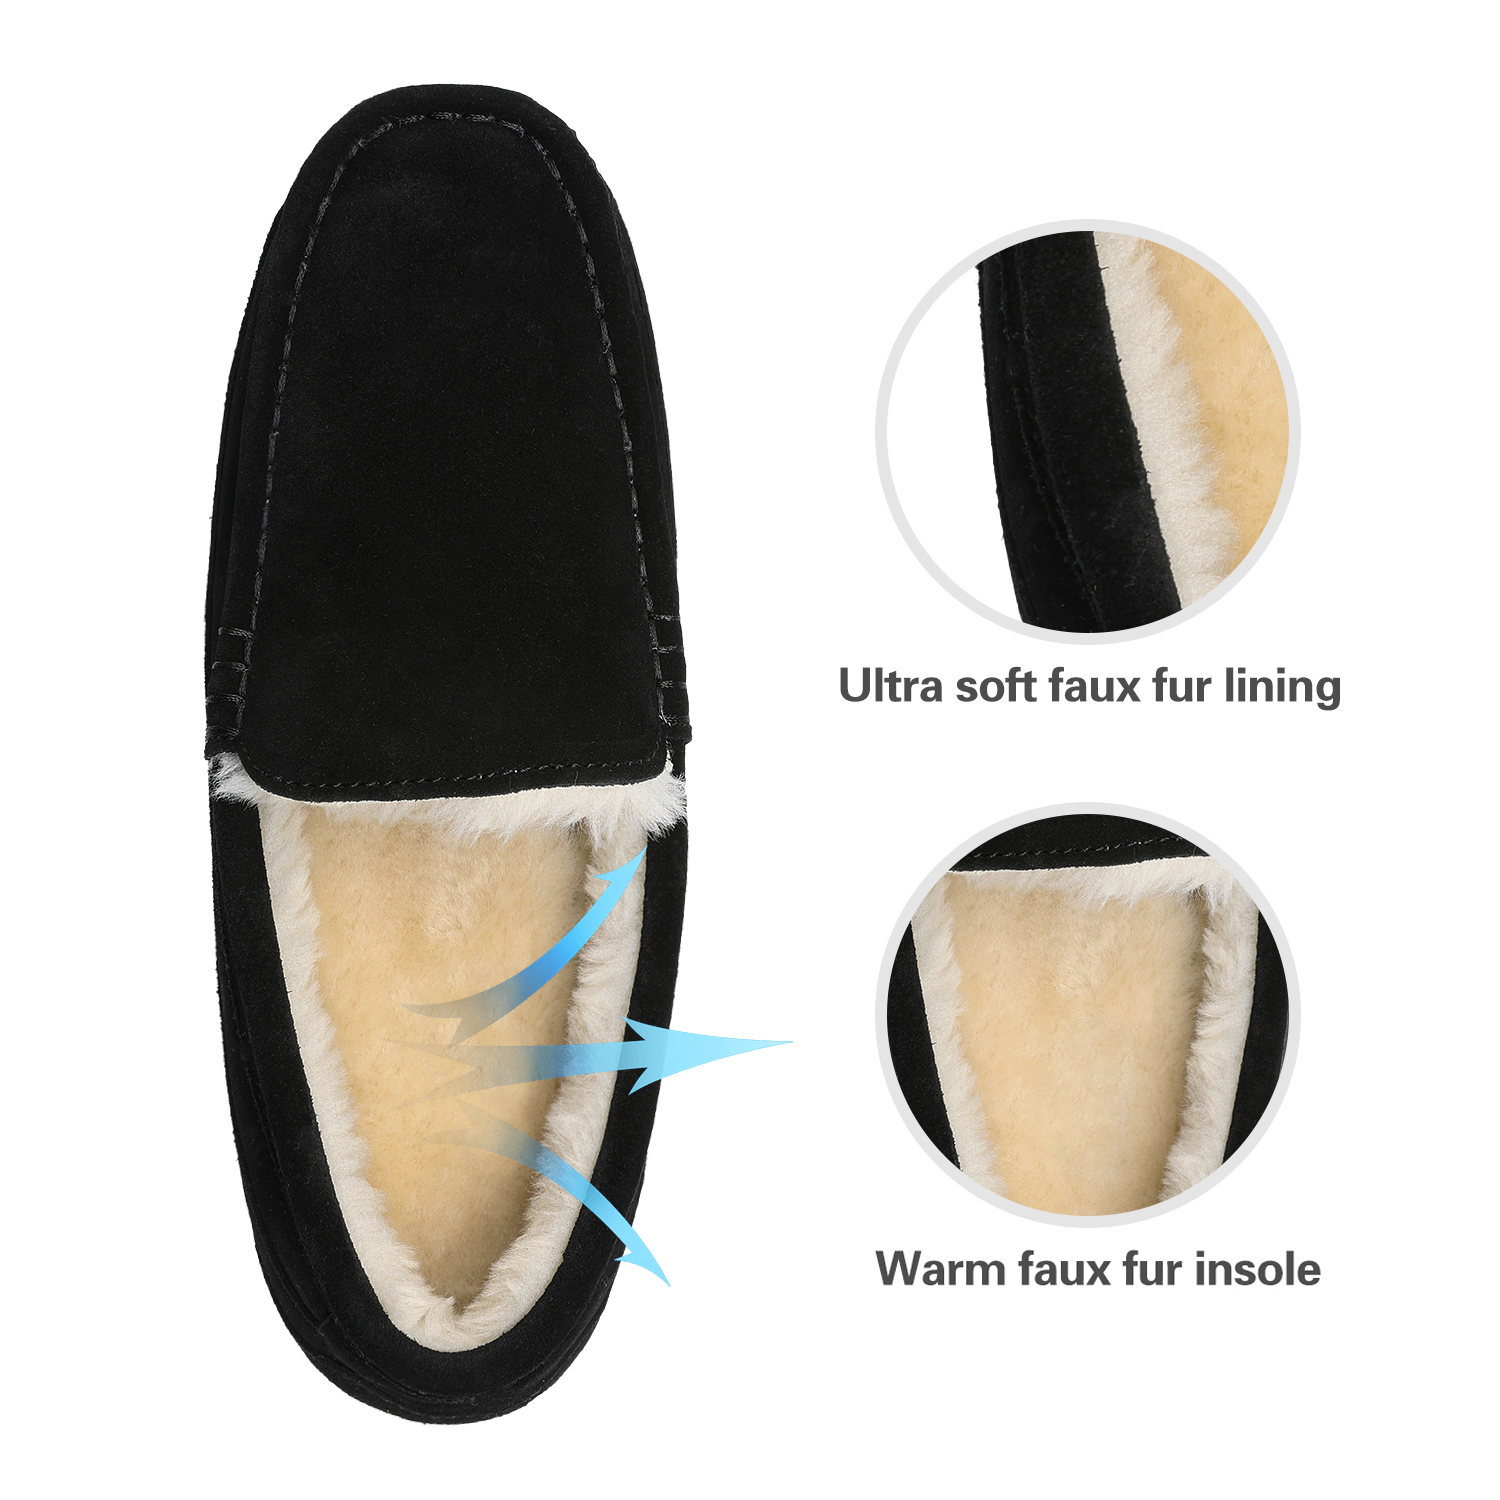 Dream Pairs New Soft Mens Au-Loafer Indoor Warm Moccasins Slippers Flats Shoes Au-Loafer-01 Black Size 7 - image 2 of 5